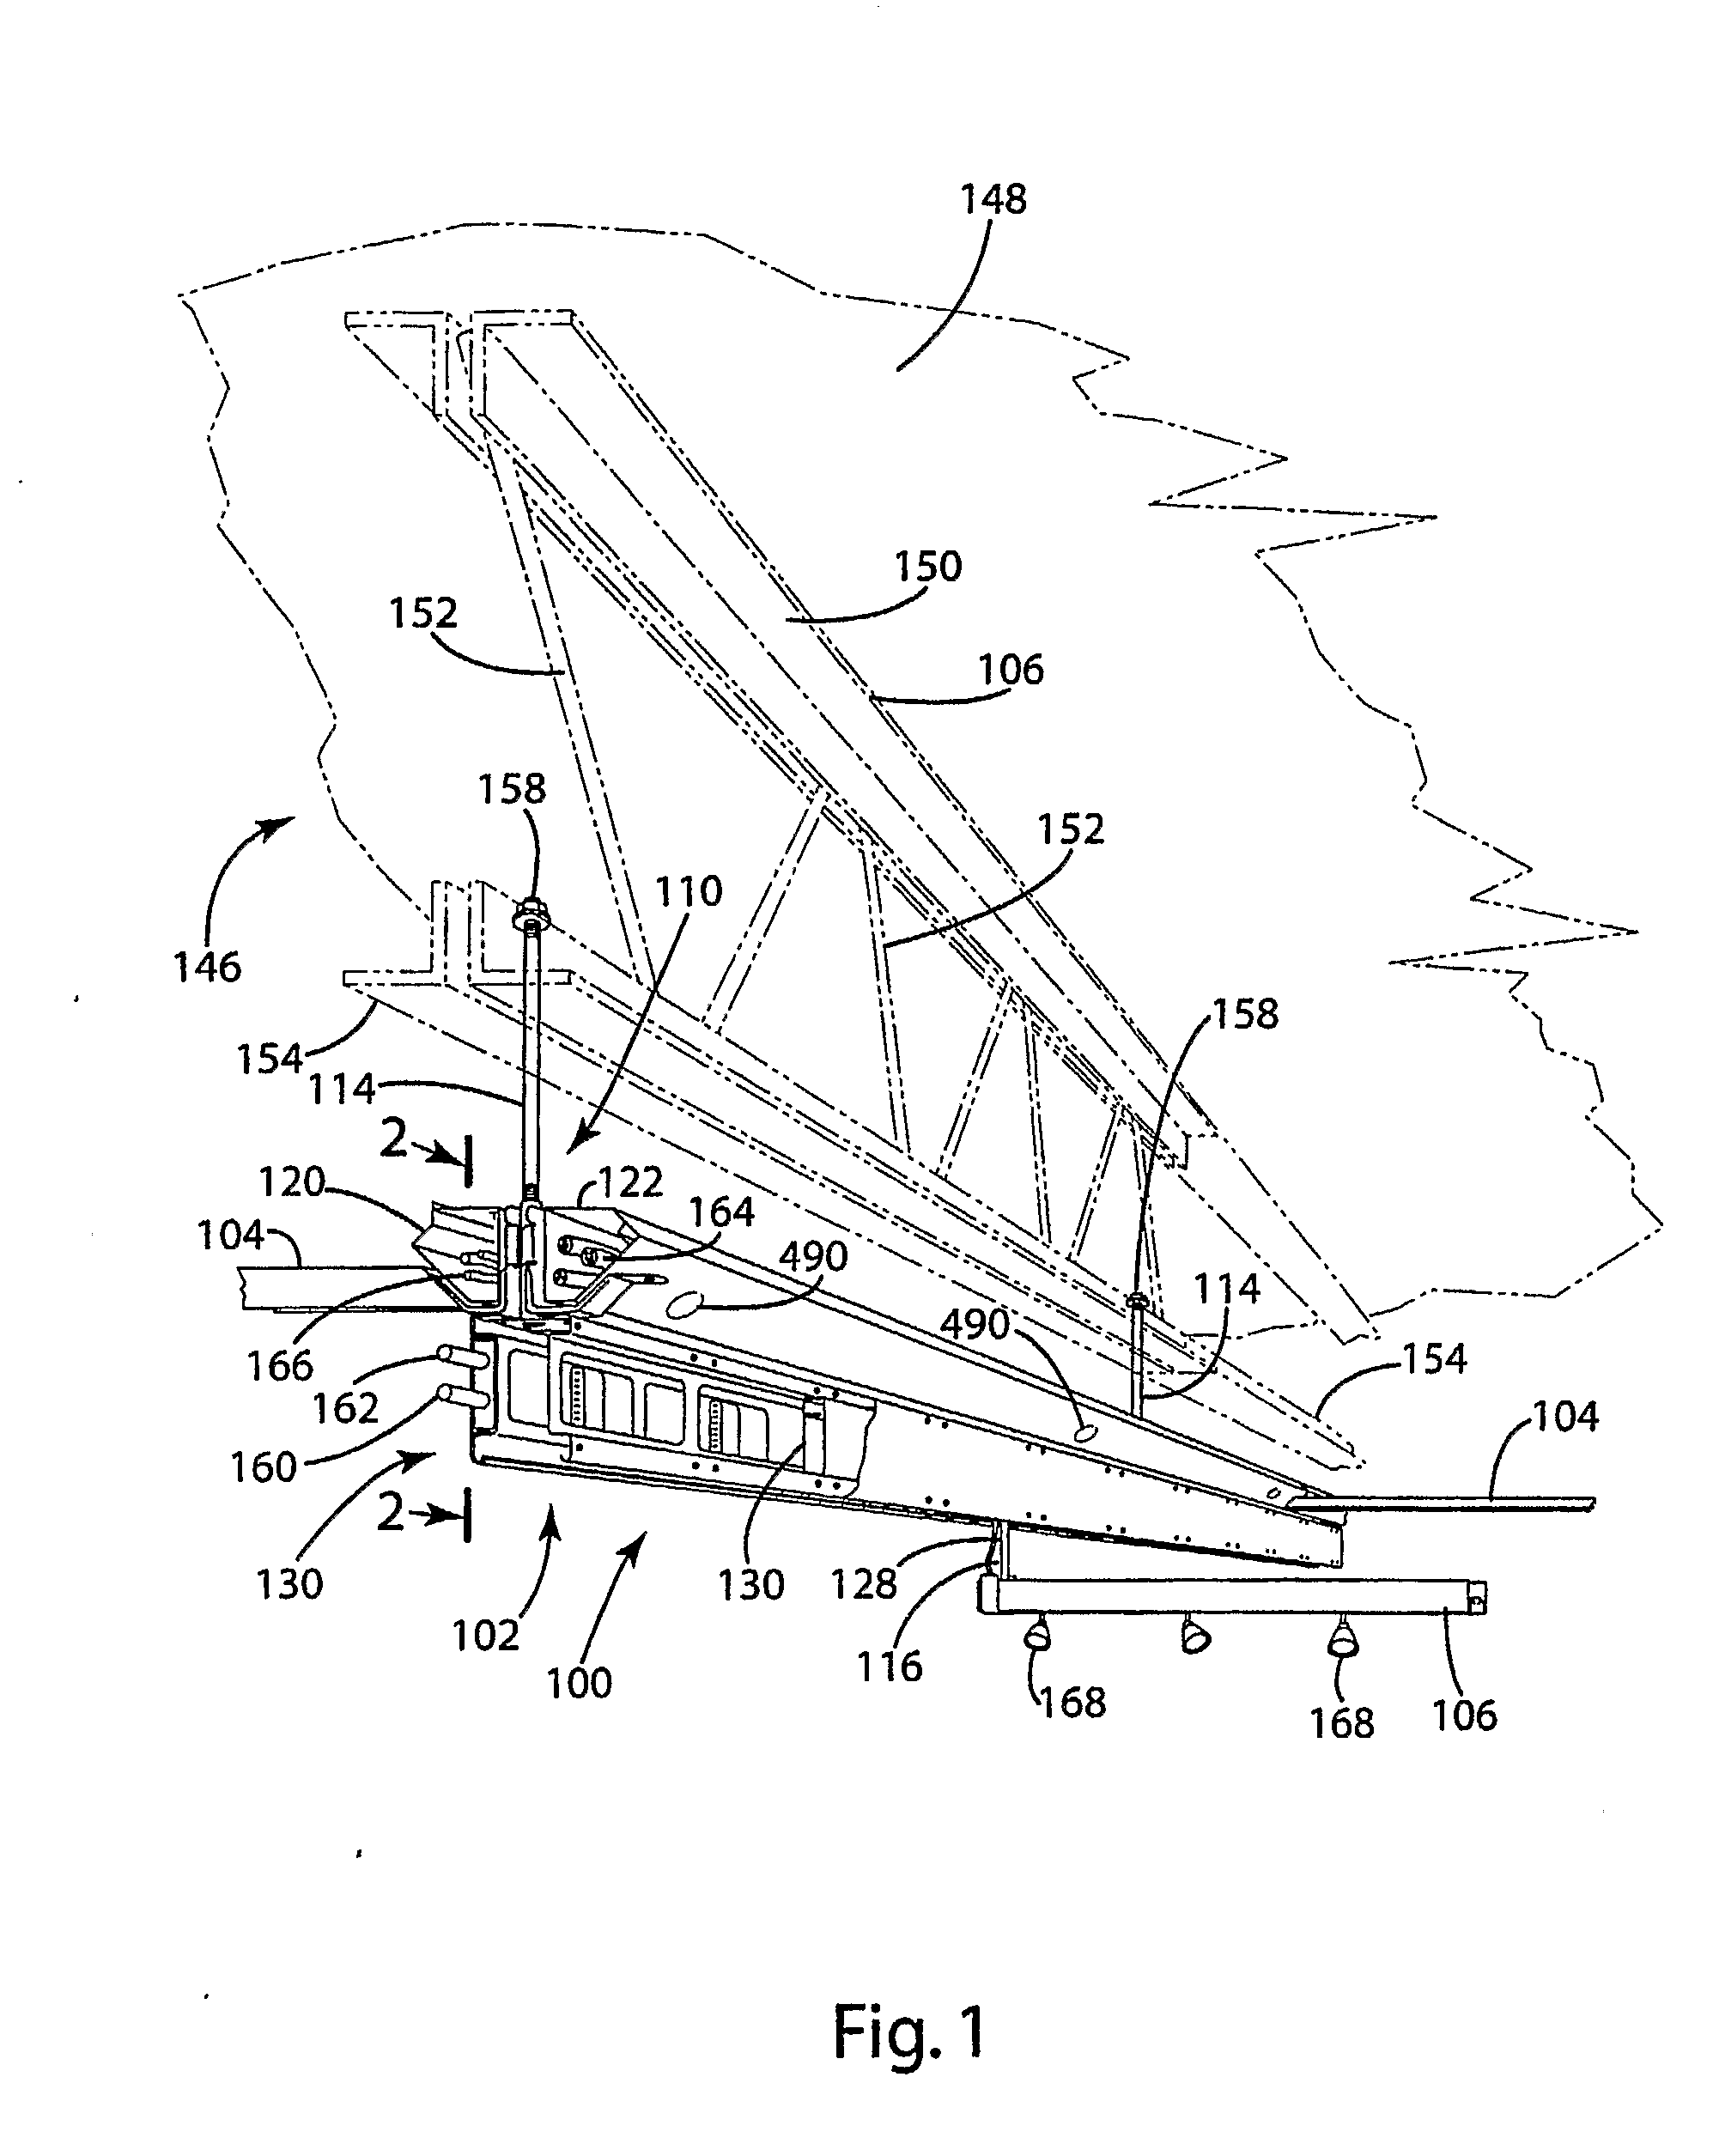 Power and Communication Distribution Using a Structural Channel Stystem